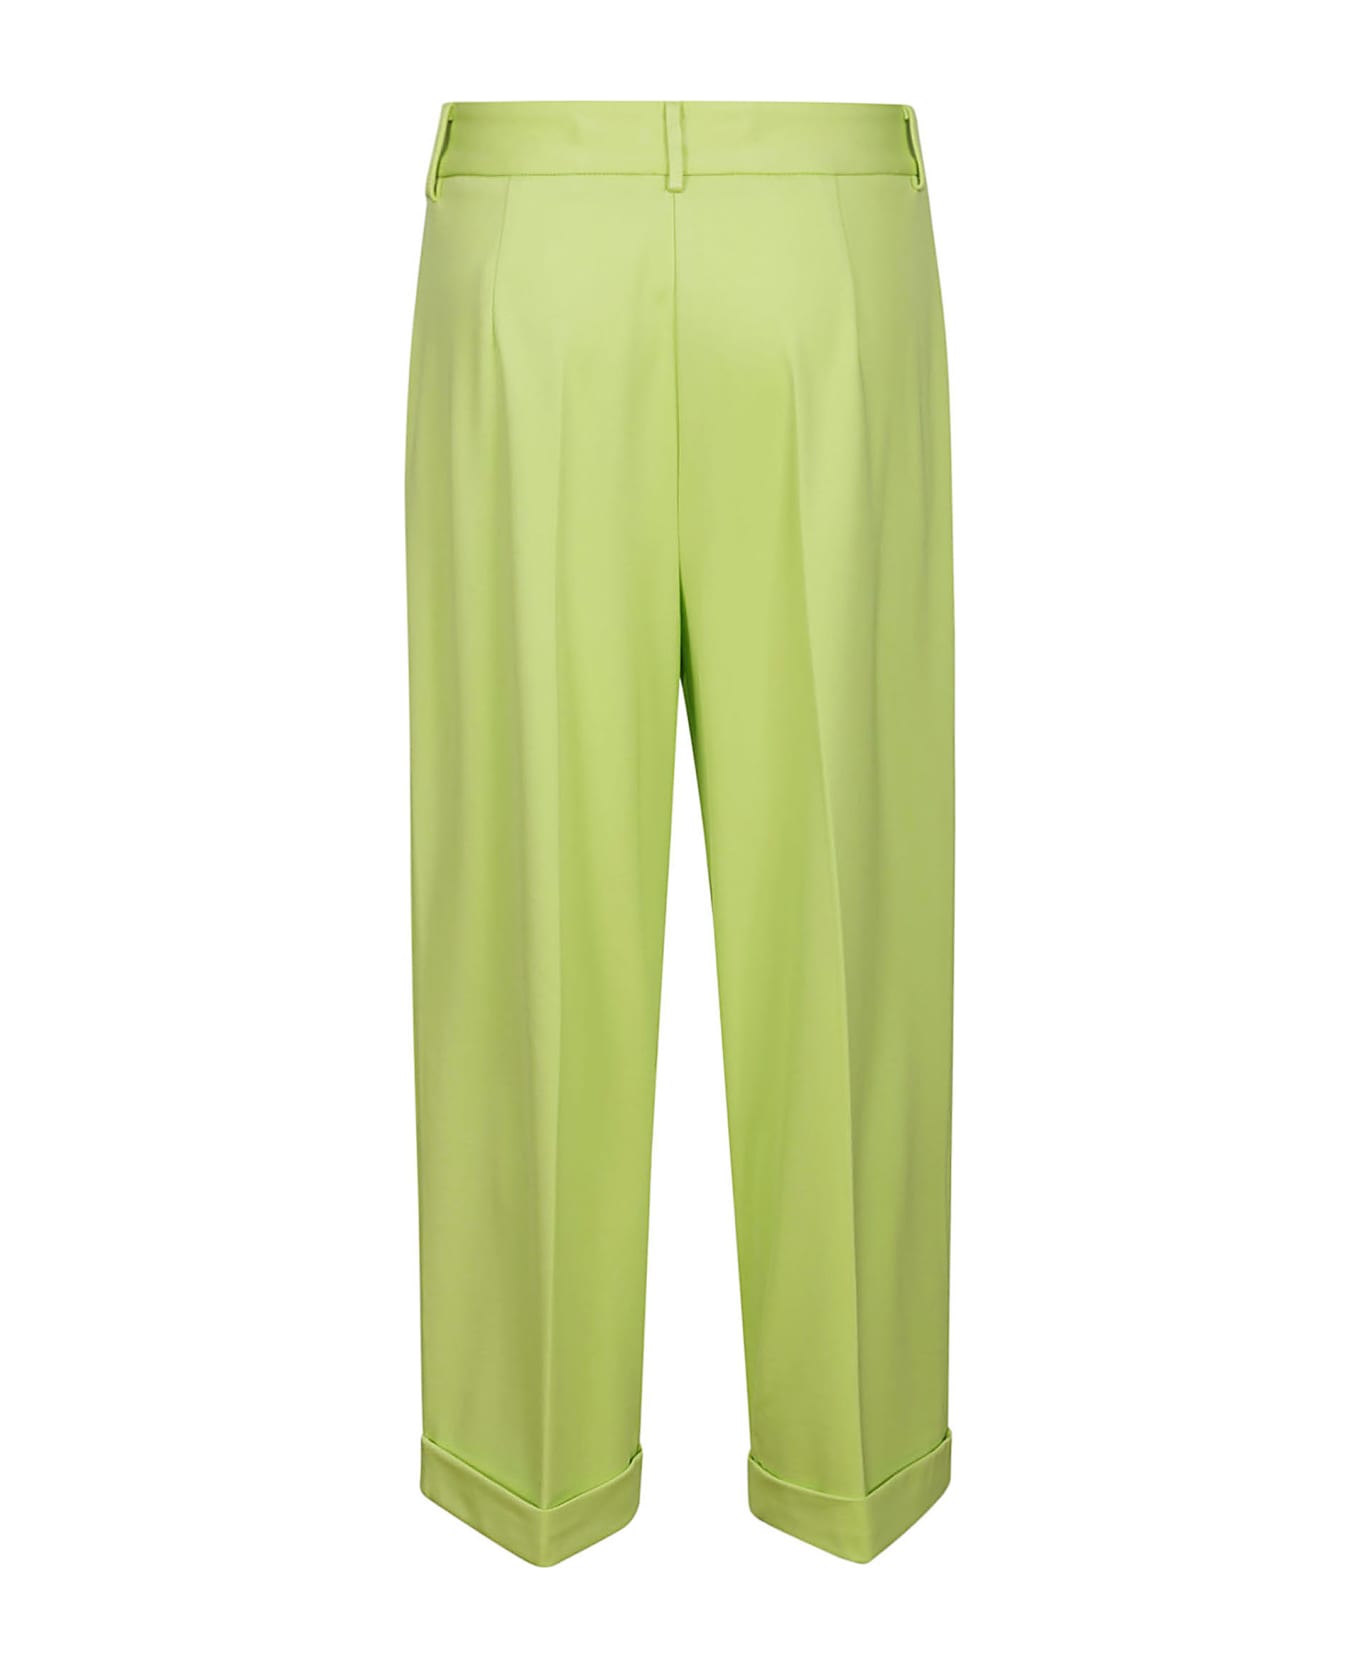 Liviana Conti Trouser - Cyber Lime ボトムス